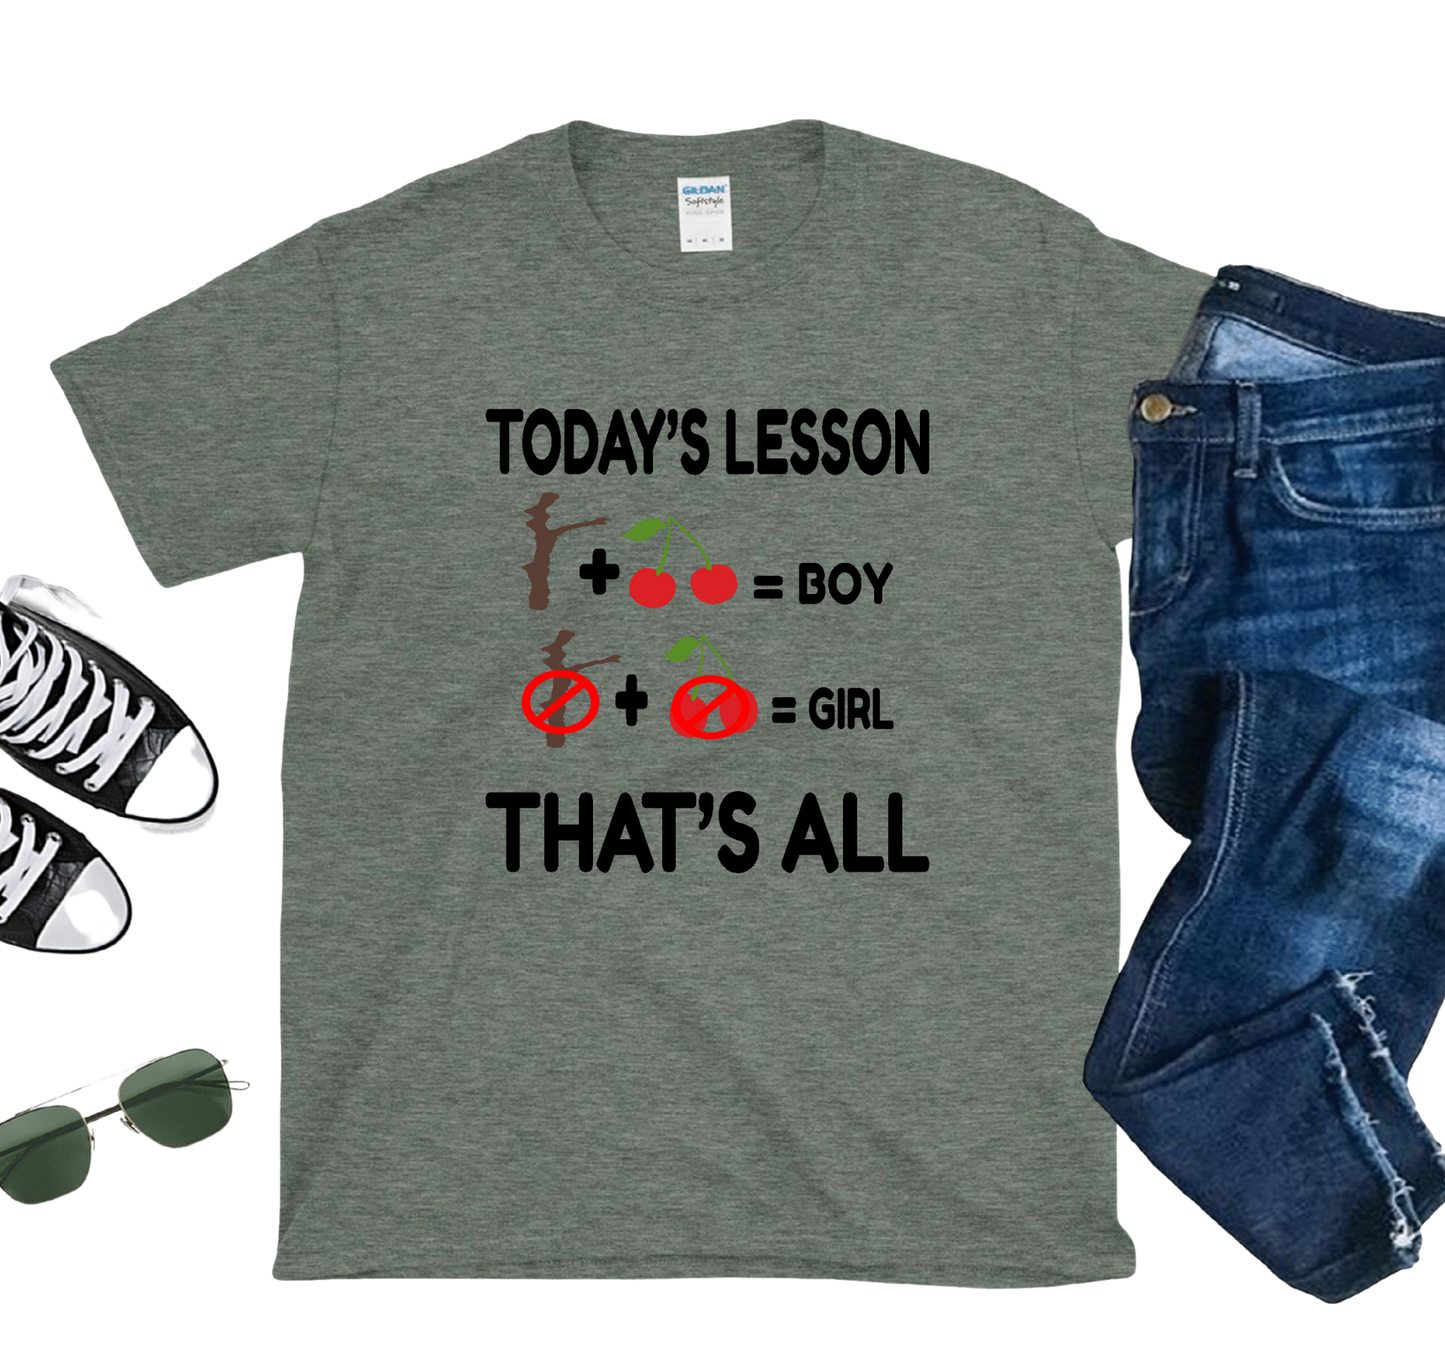 Today's Lesson T-Shirt